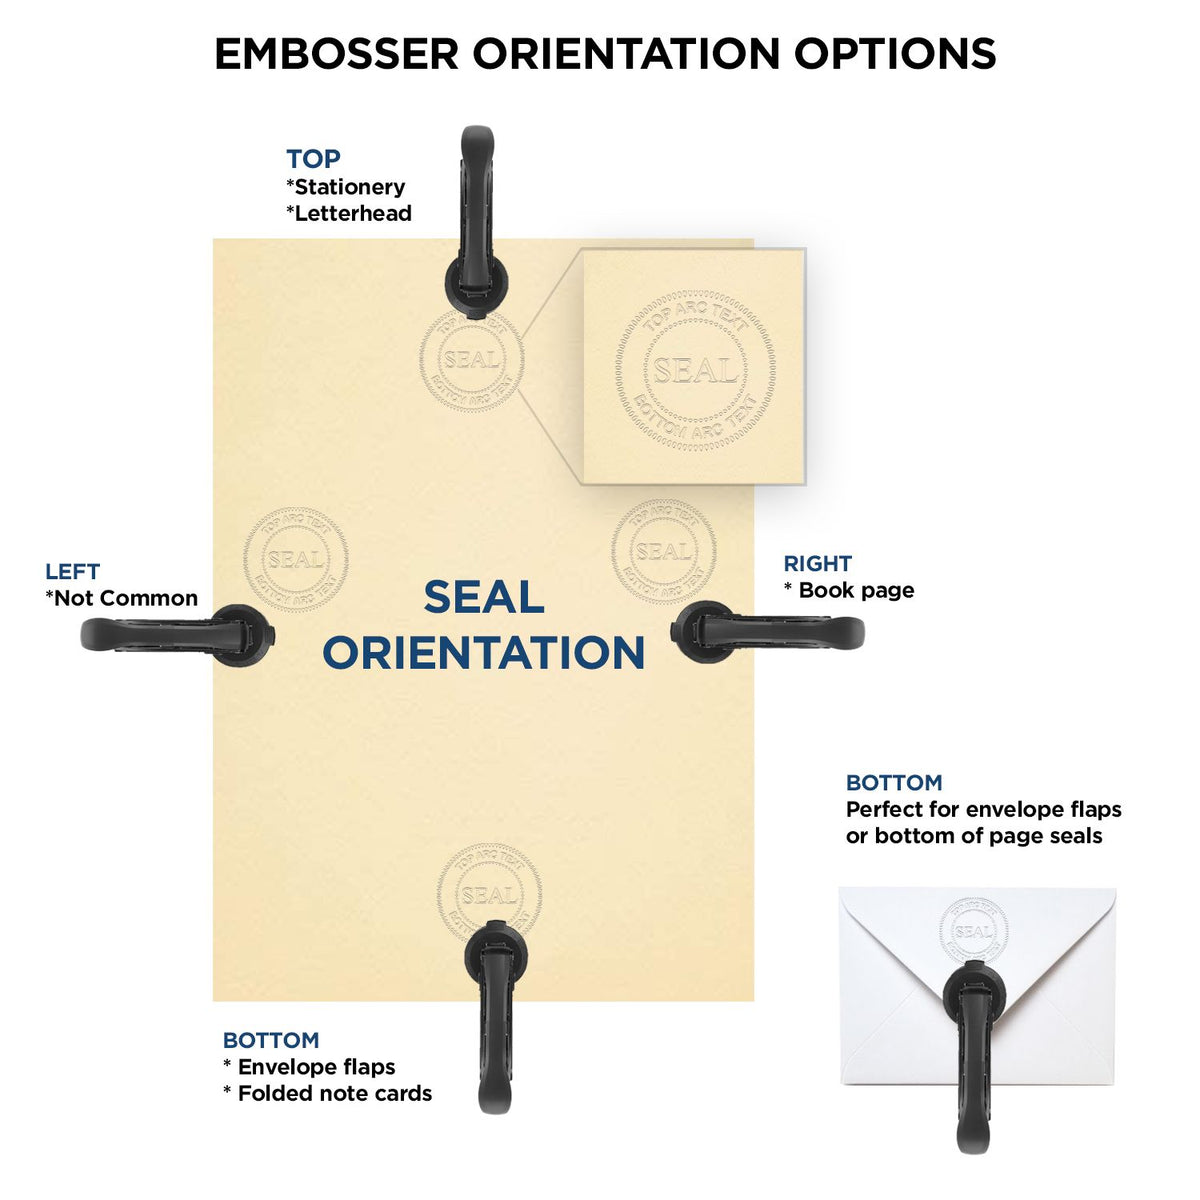 An infographic for the Handheld Indiana Professional Engineer Embosser showing embosser orientation, this is showing examples of a top, bottom, right and left insert.